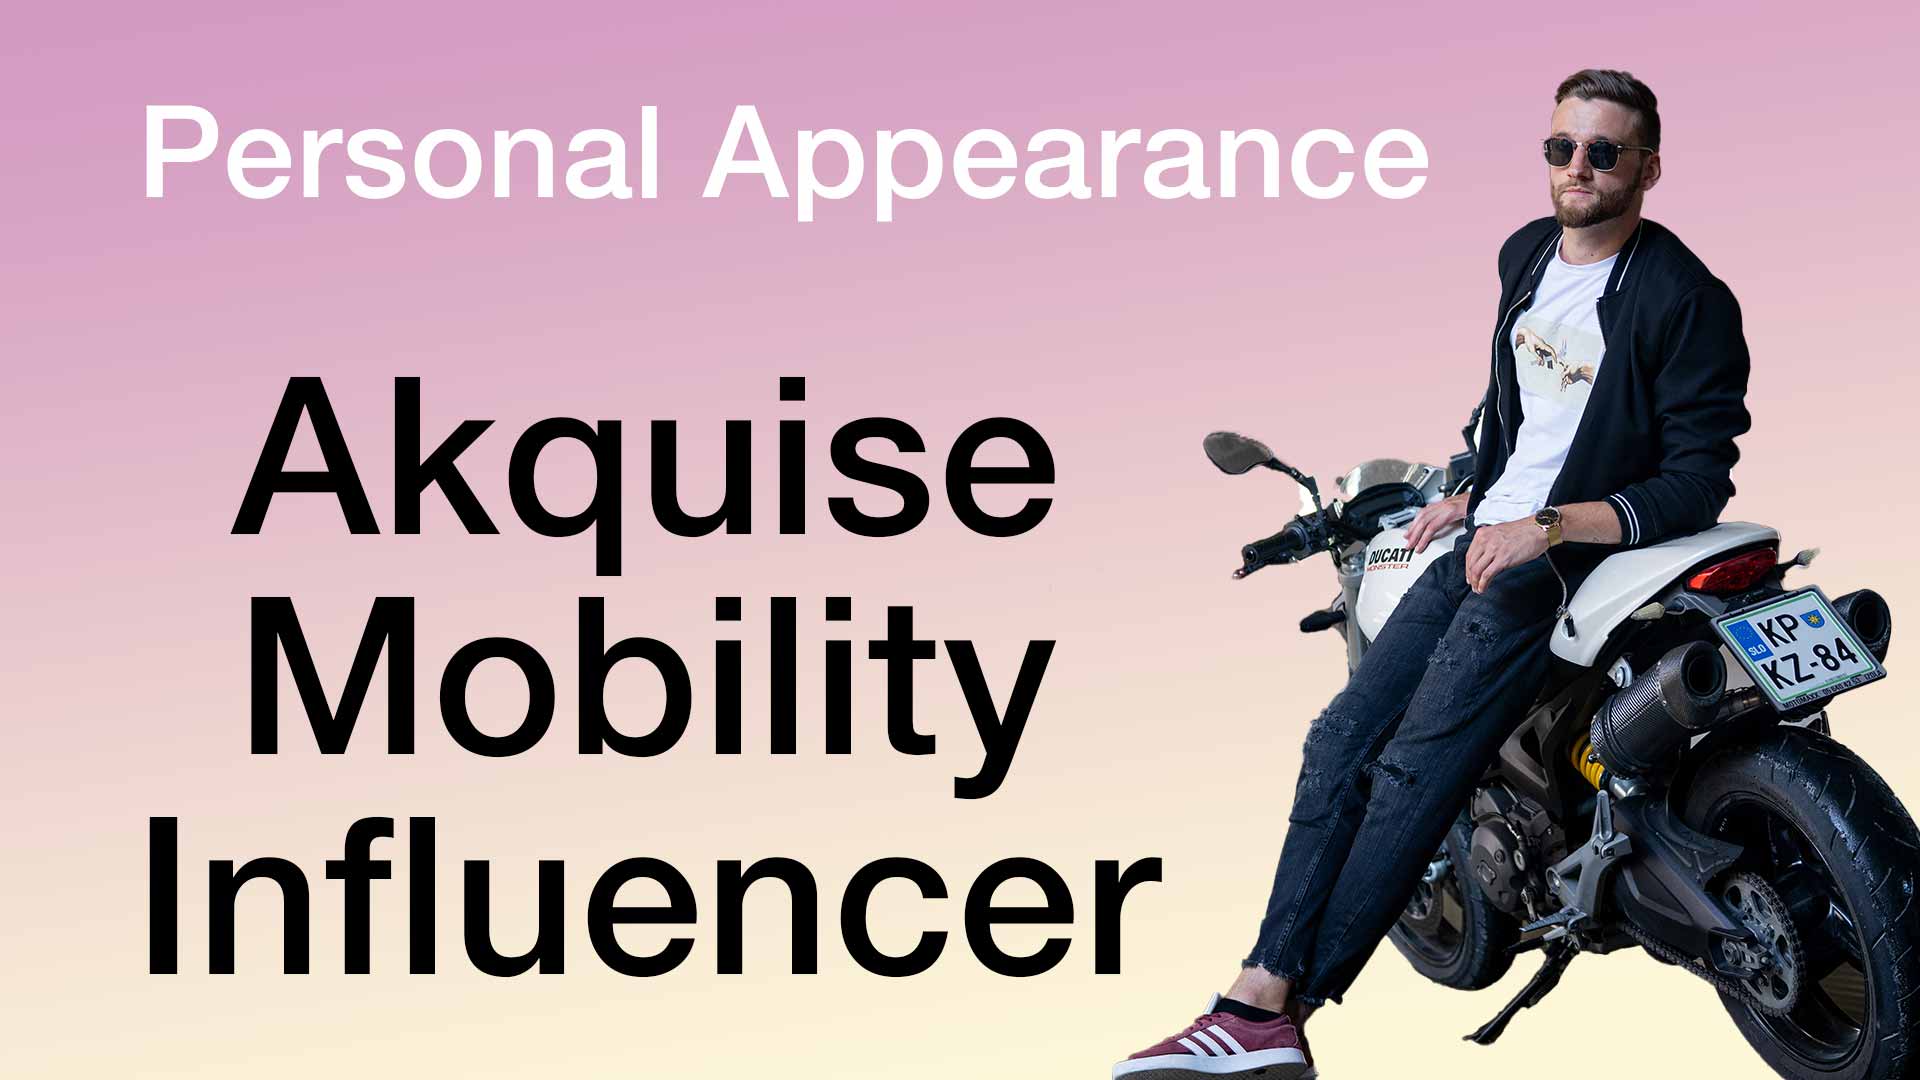 Akquise MOBILITY Influencer inkl. Personal Appearance